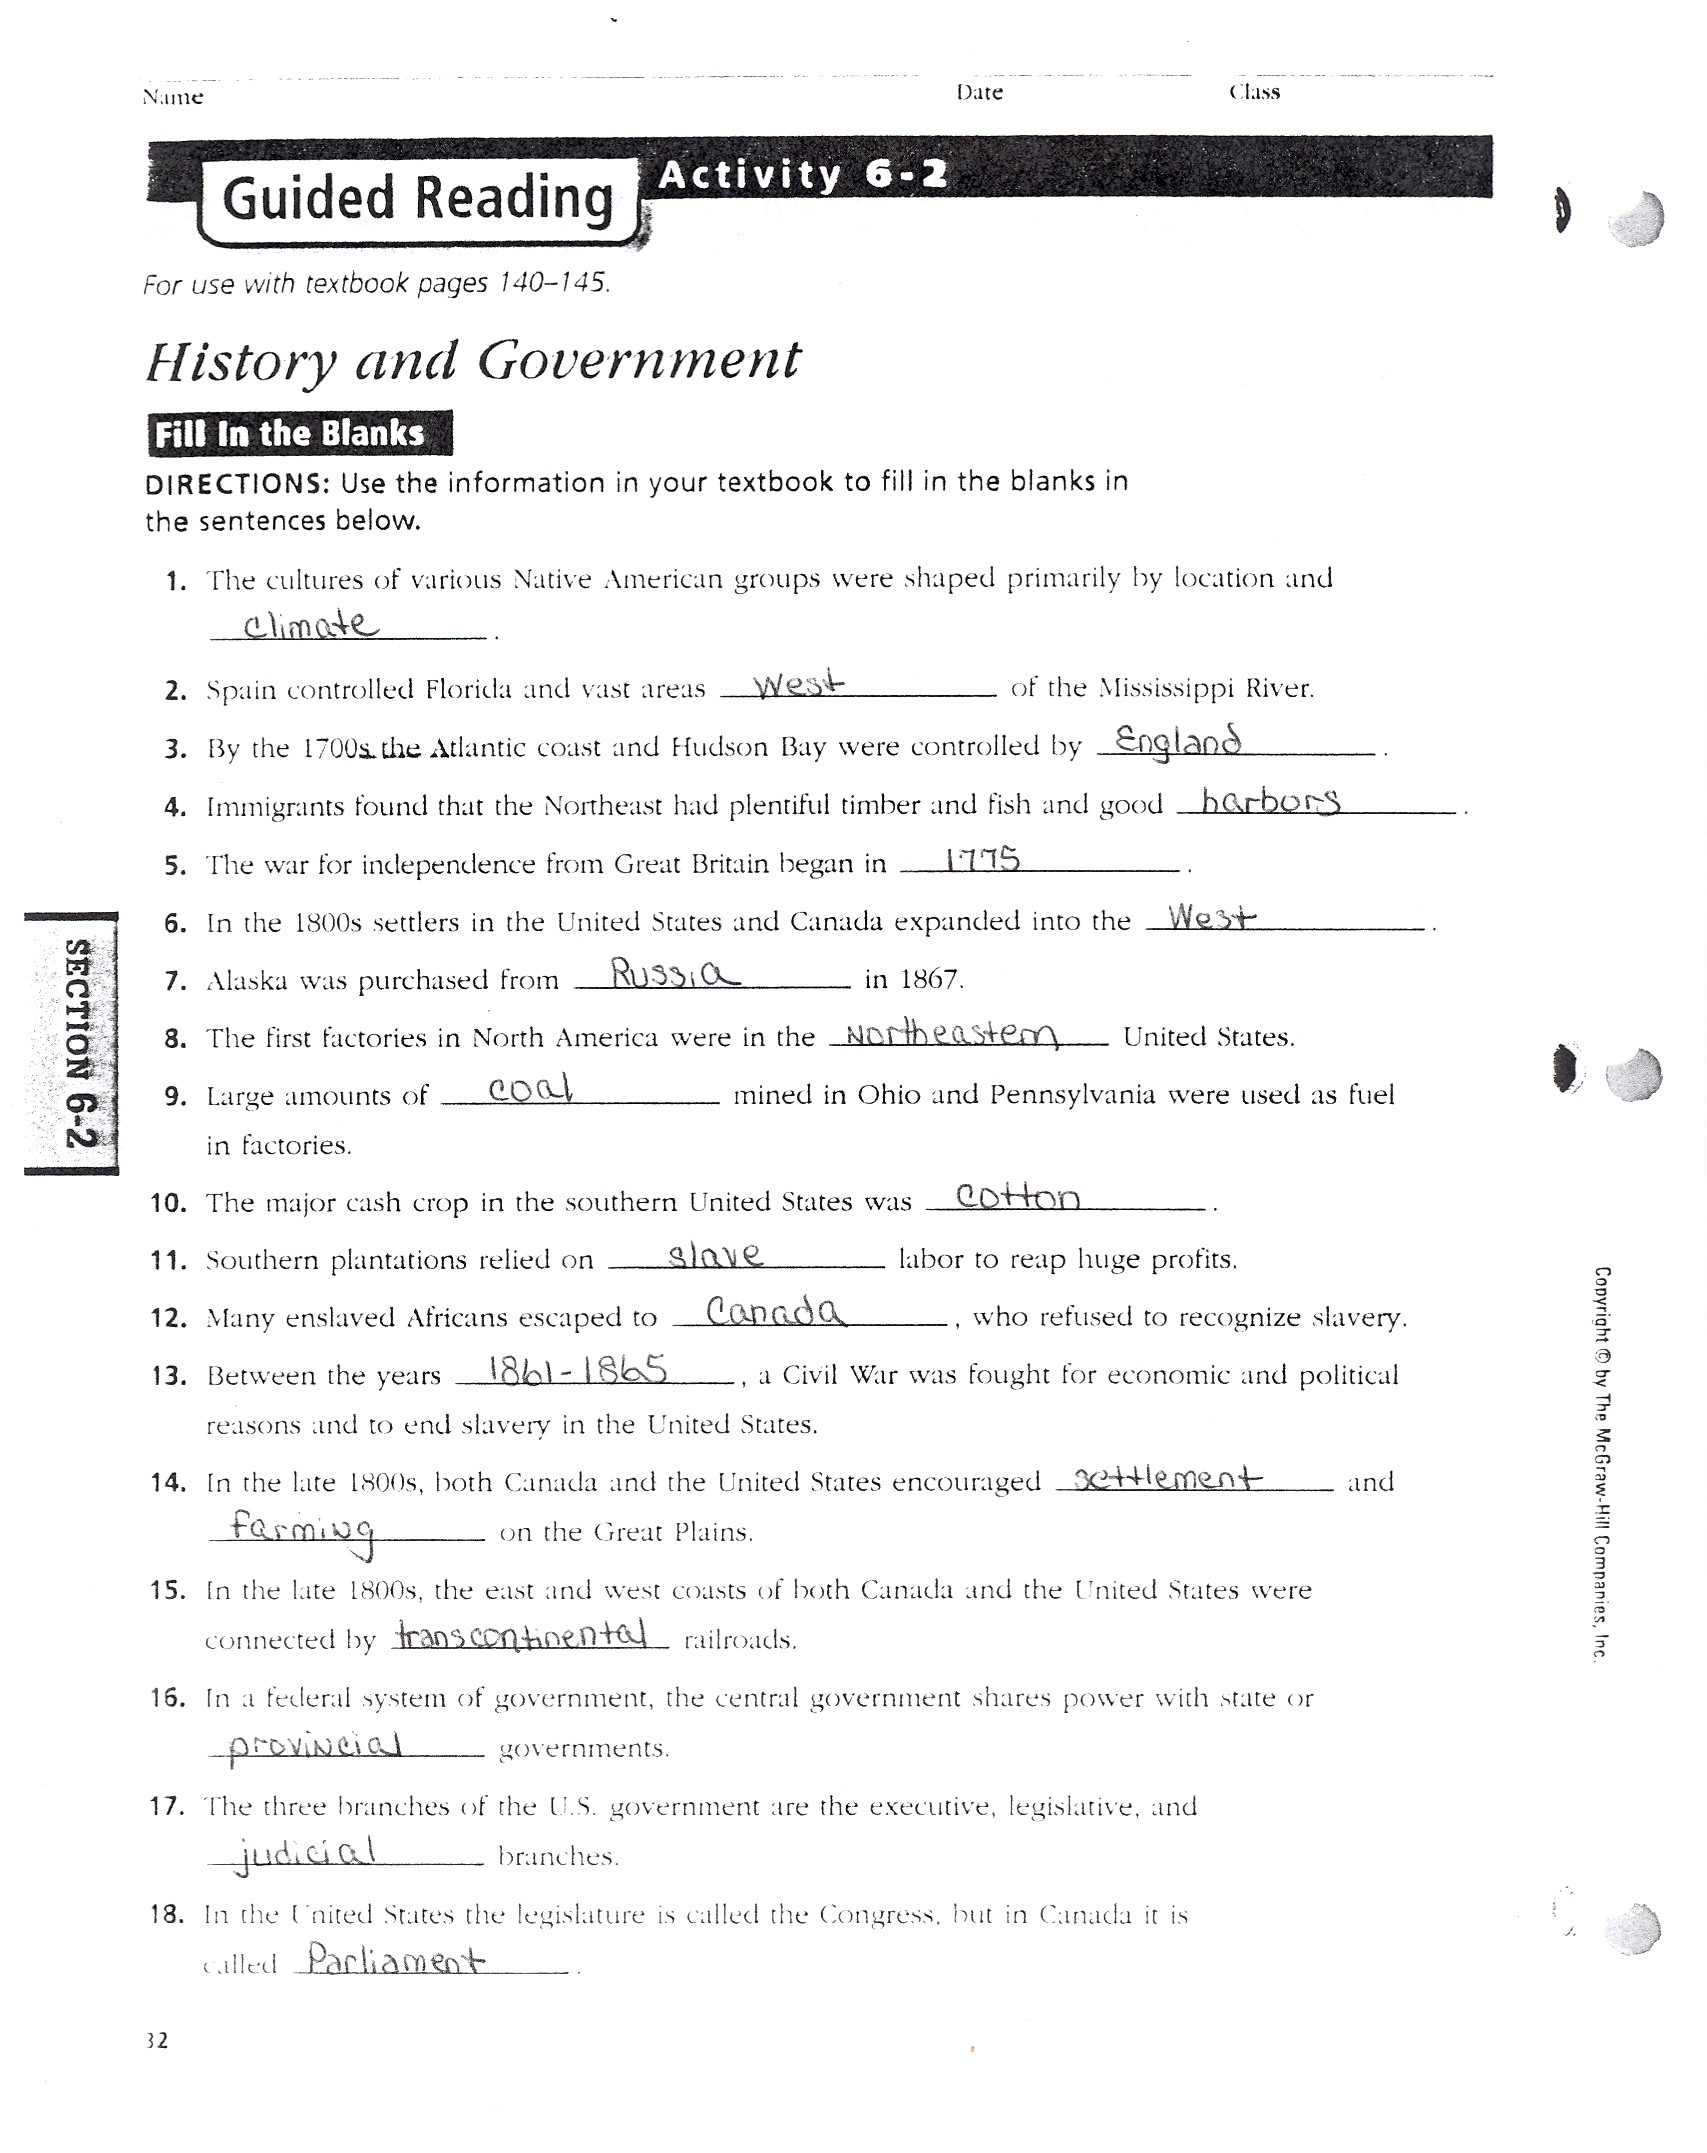 guided-reading-activity-2-1-economic-systems-worksheet-answers-db-excel